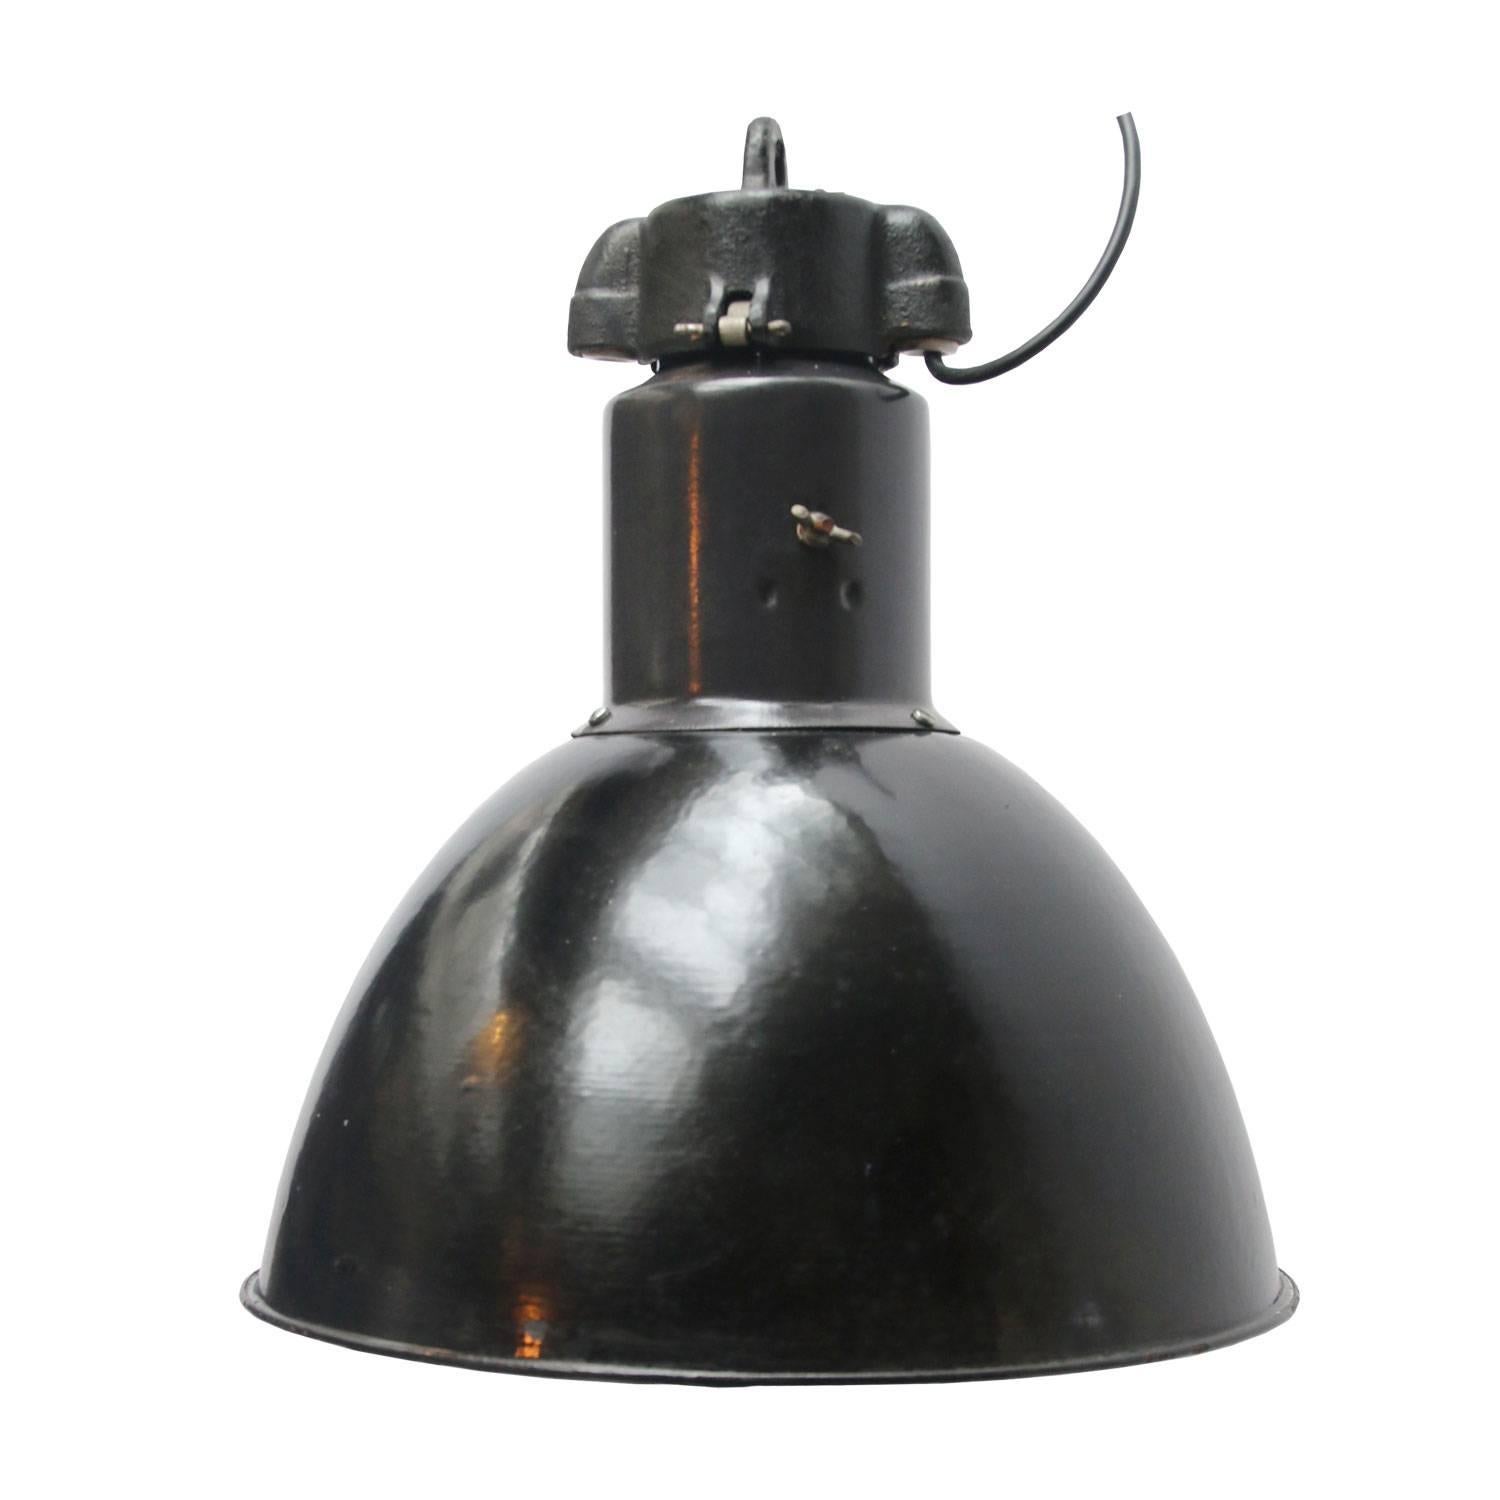 Bauhaus Classic from the 1930s. Black enamel industrial hanging lamp. Cast iron top. White interior.

Weight 2.4 kg / 5.3 lb

Priced per individual item. All lamps have been made suitable by international standards for incandescent light bulbs,